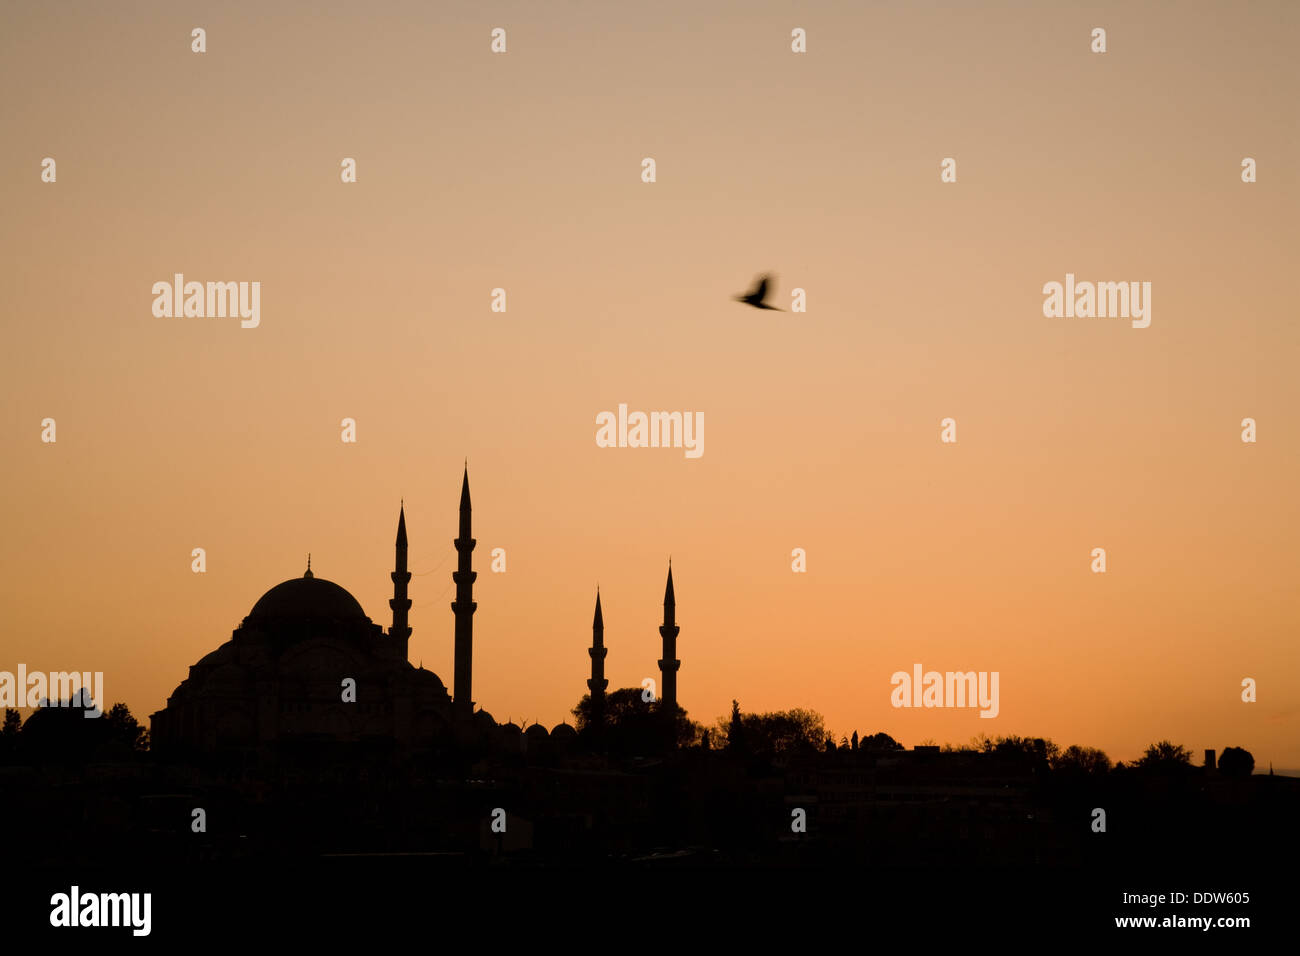 Süleymaniye Mosque and a single bird silhouetted at sunset, Istanbul, Turkey. Stock Photo